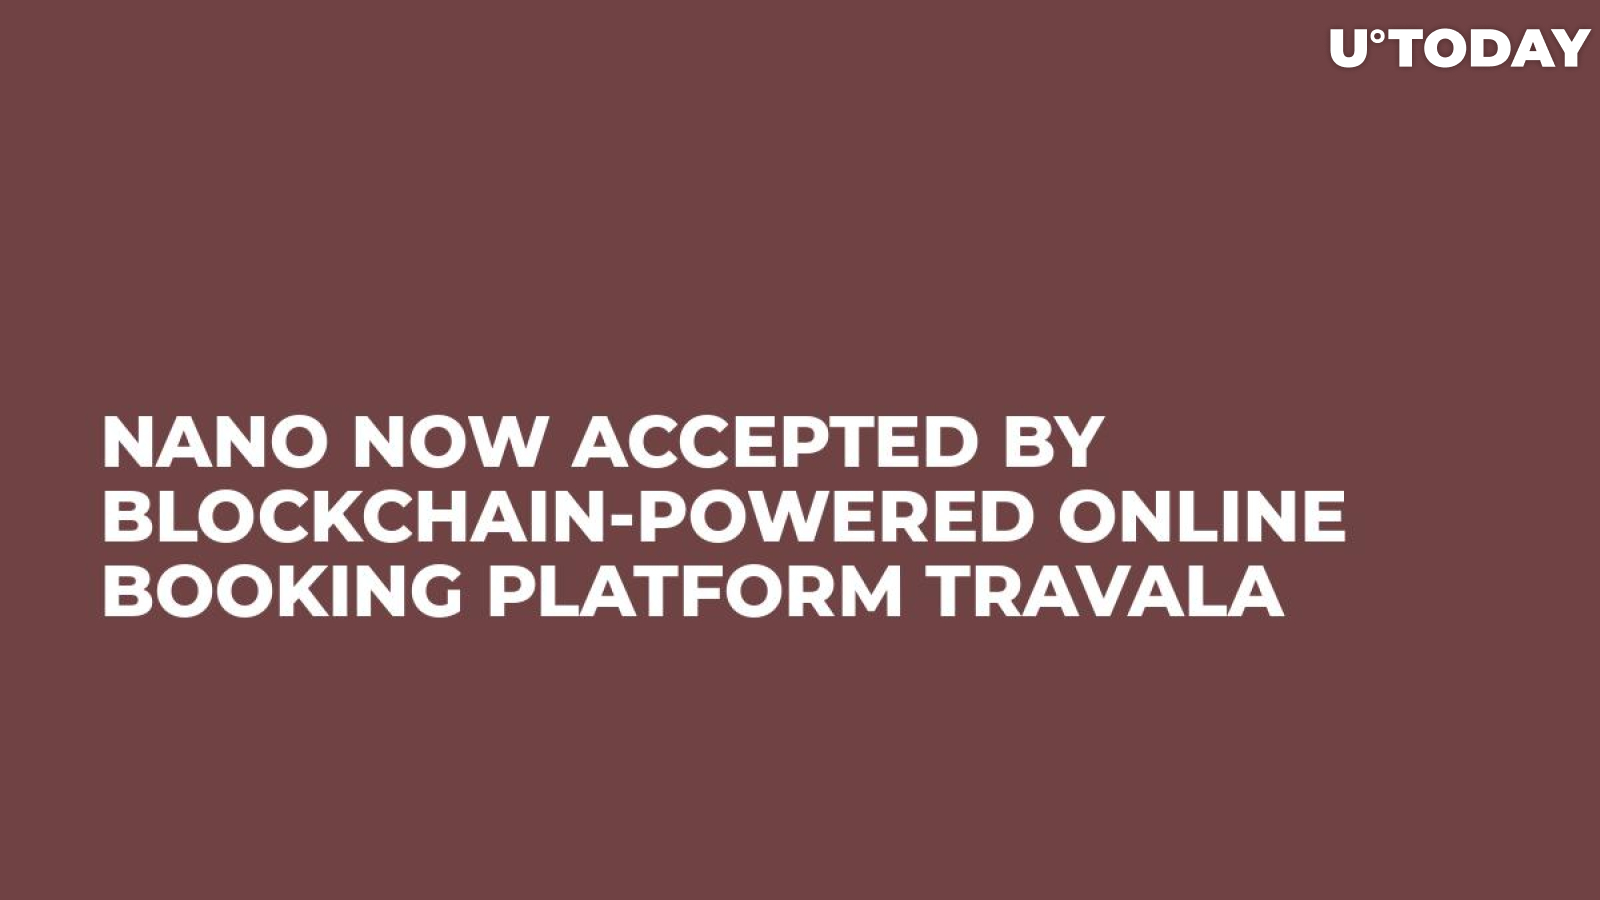 NANO Now Accepted by Blockchain-Powered Online Booking Platform Travala